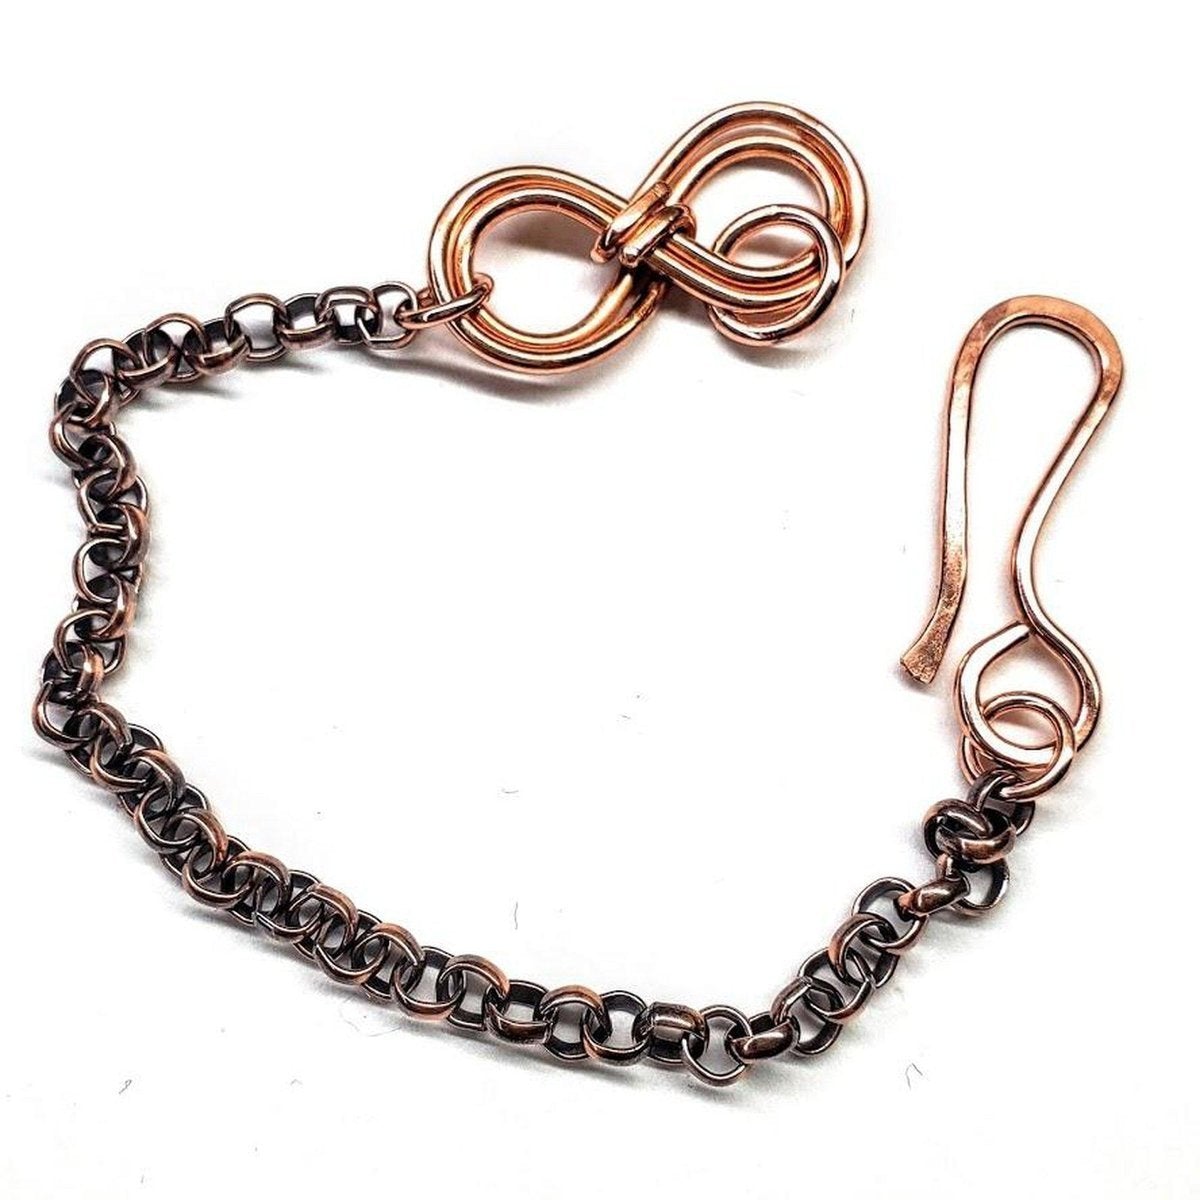 Handcrafted Copper Double Infinity Bracelet for Him and Her - Rustic Style, Available in 3 Sizes - Bracelets - Bijou Her -  -  - 